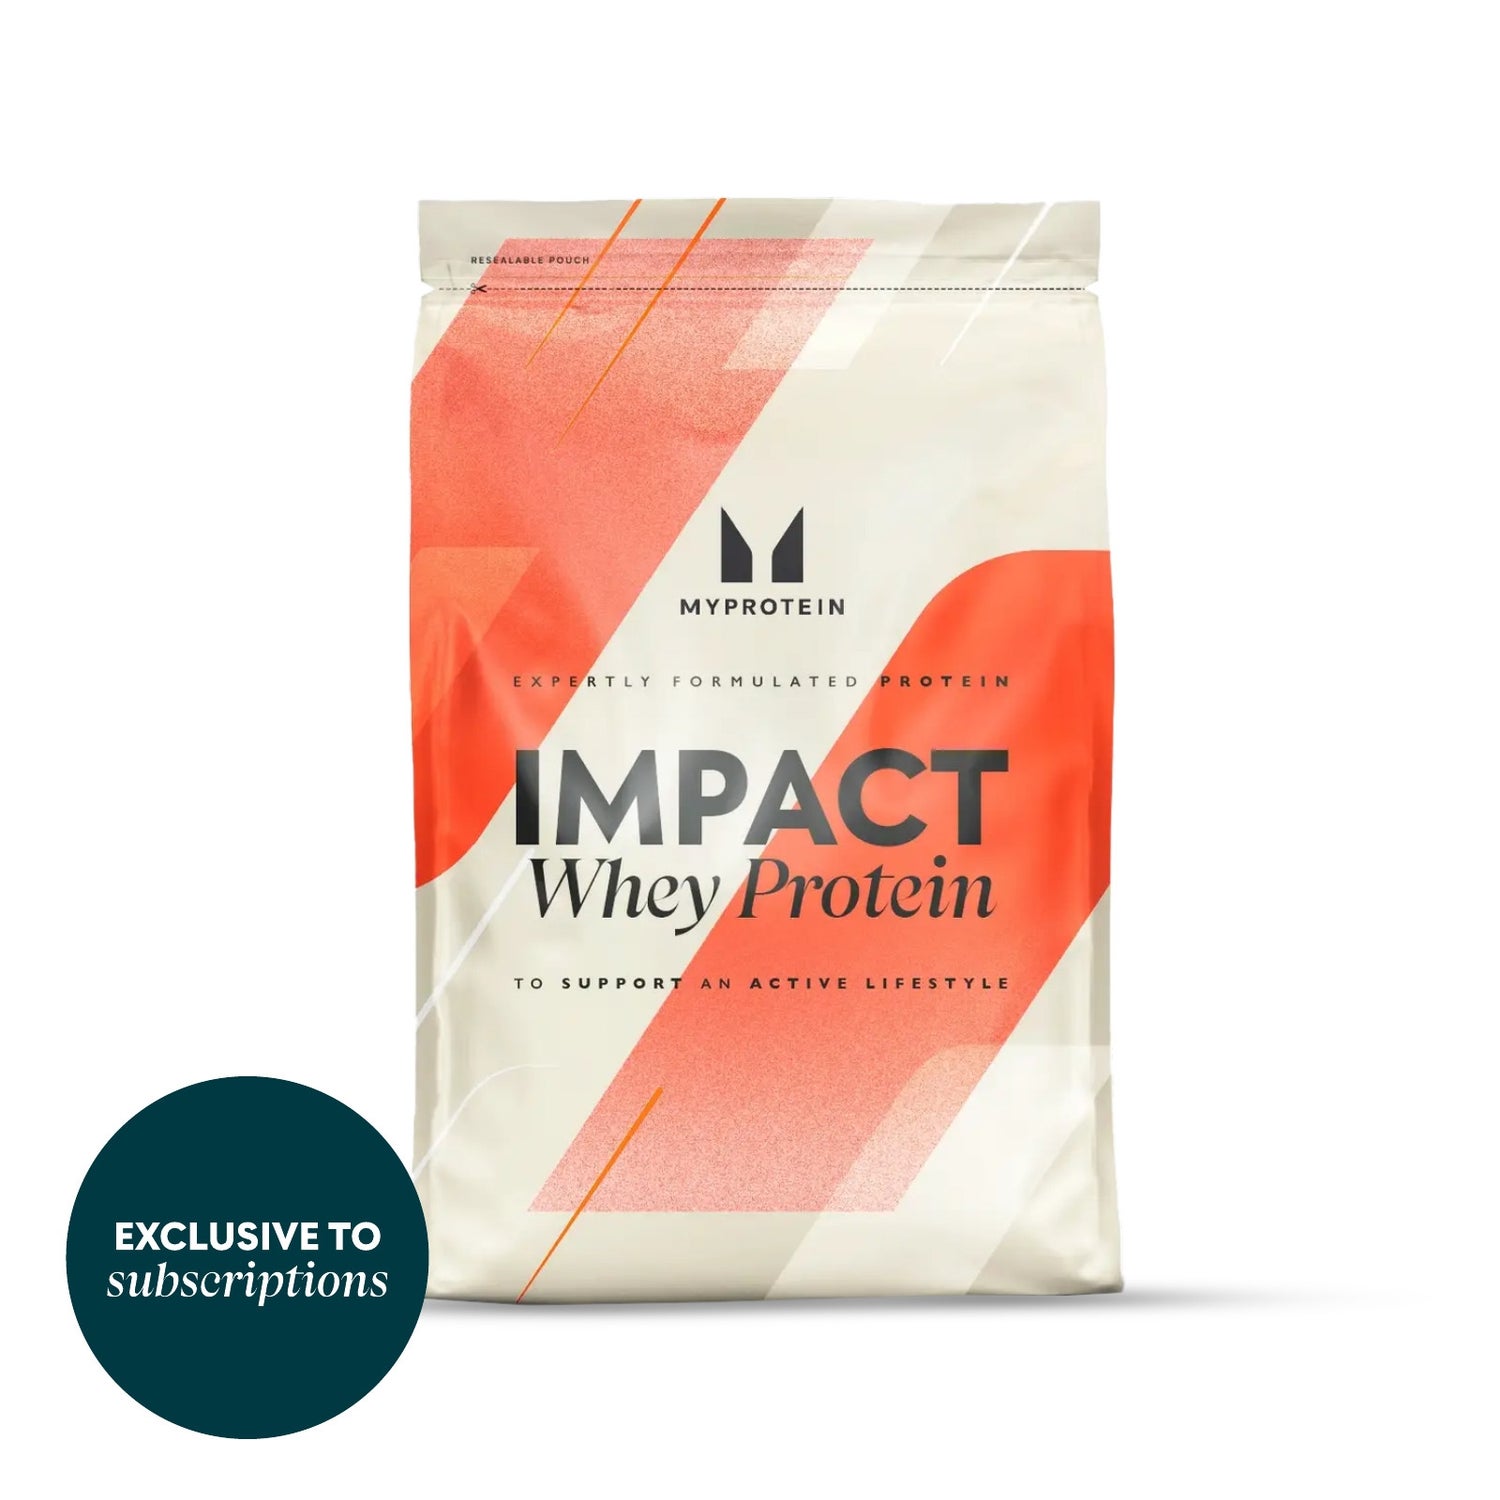 Impact Whey Protein (500g) Subscription Exclusive - 16servings - Chocolate Brownie